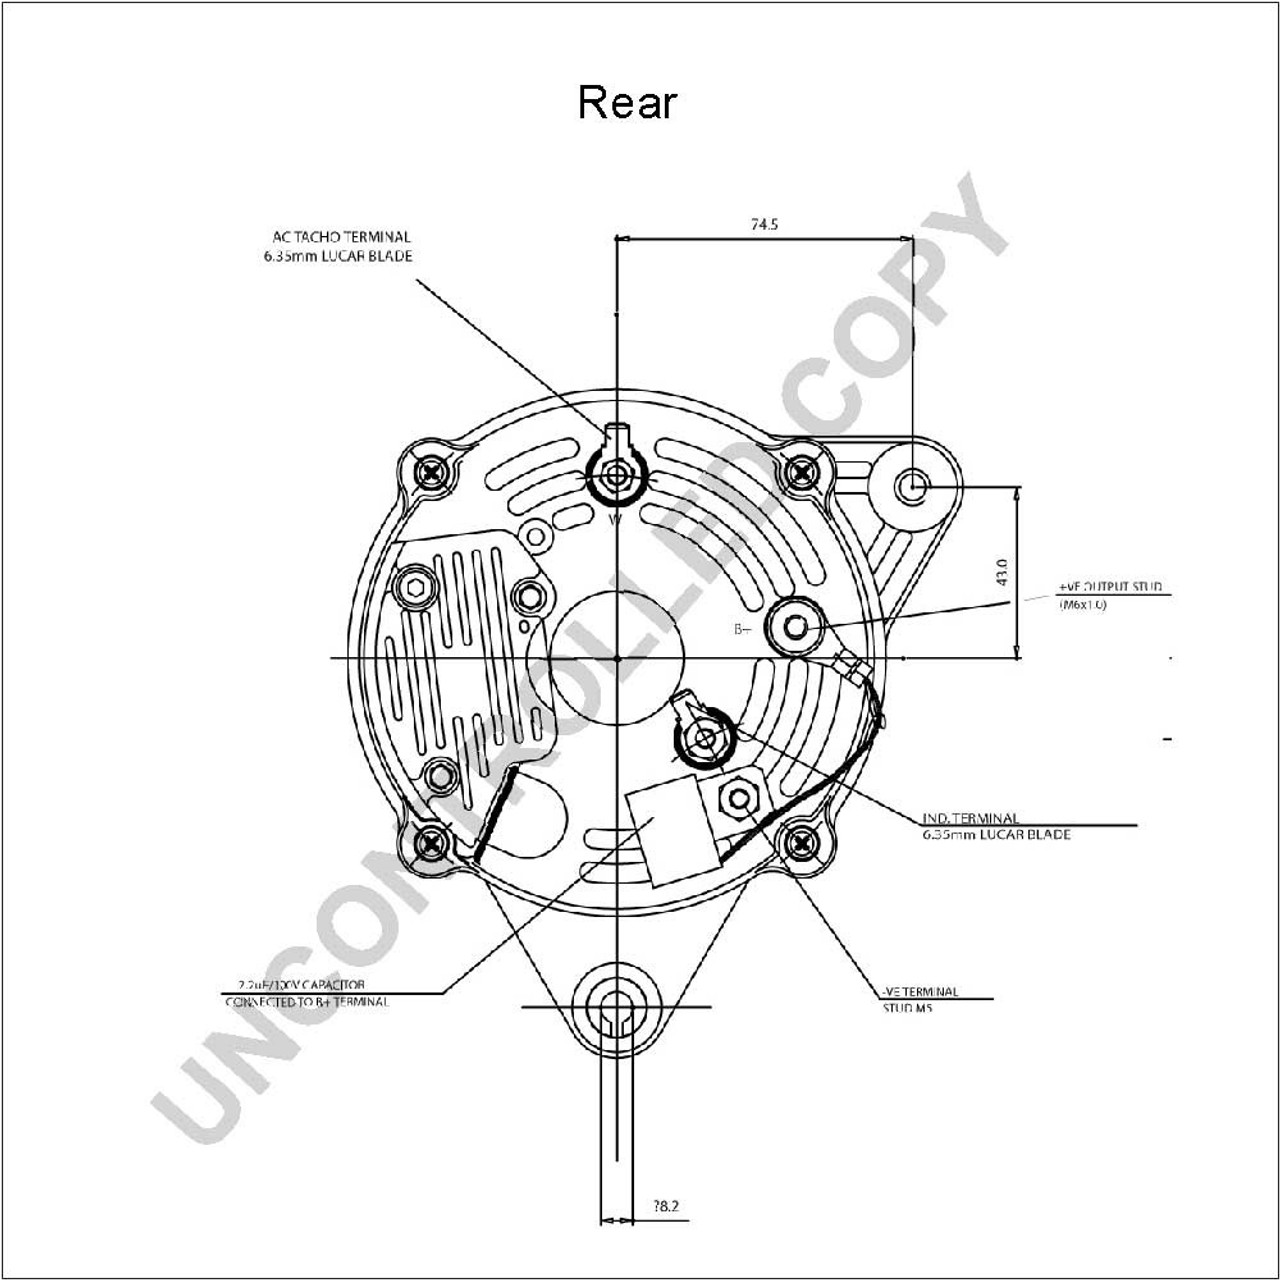 Perkins 4.236 90A high output (isolated earth) alternator from Parts4Engines.com